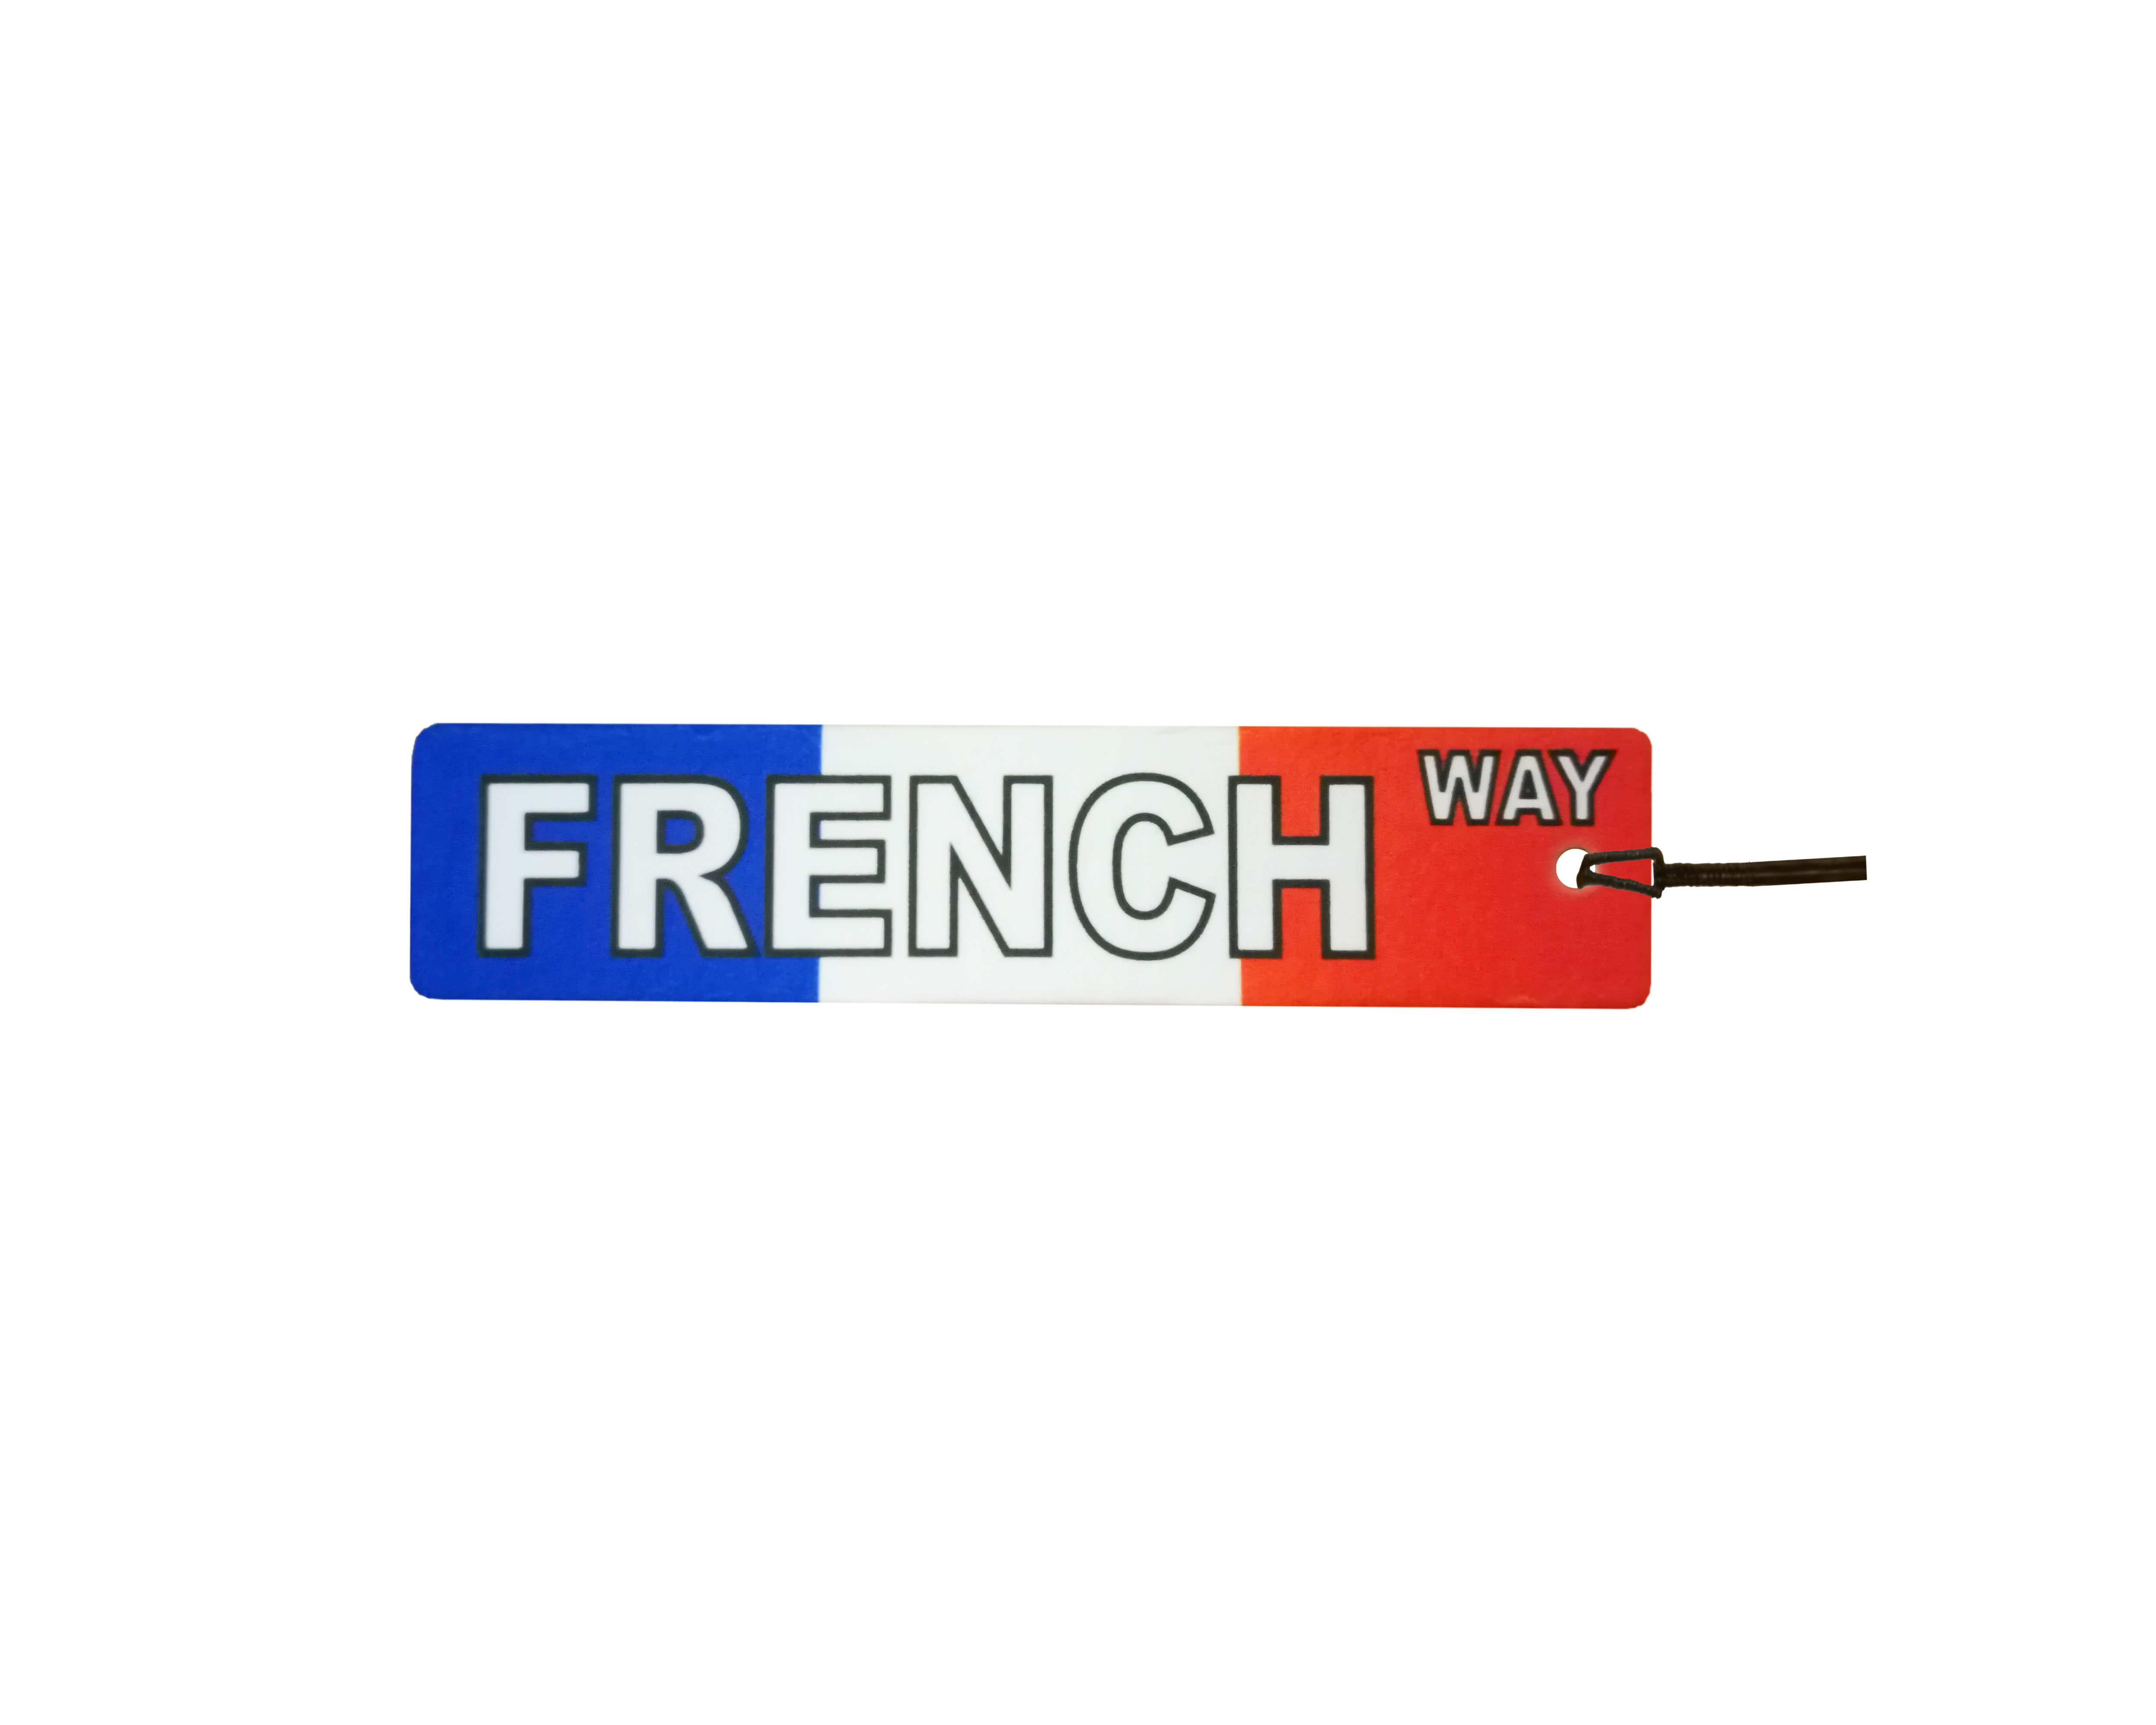 French Way Street Sign